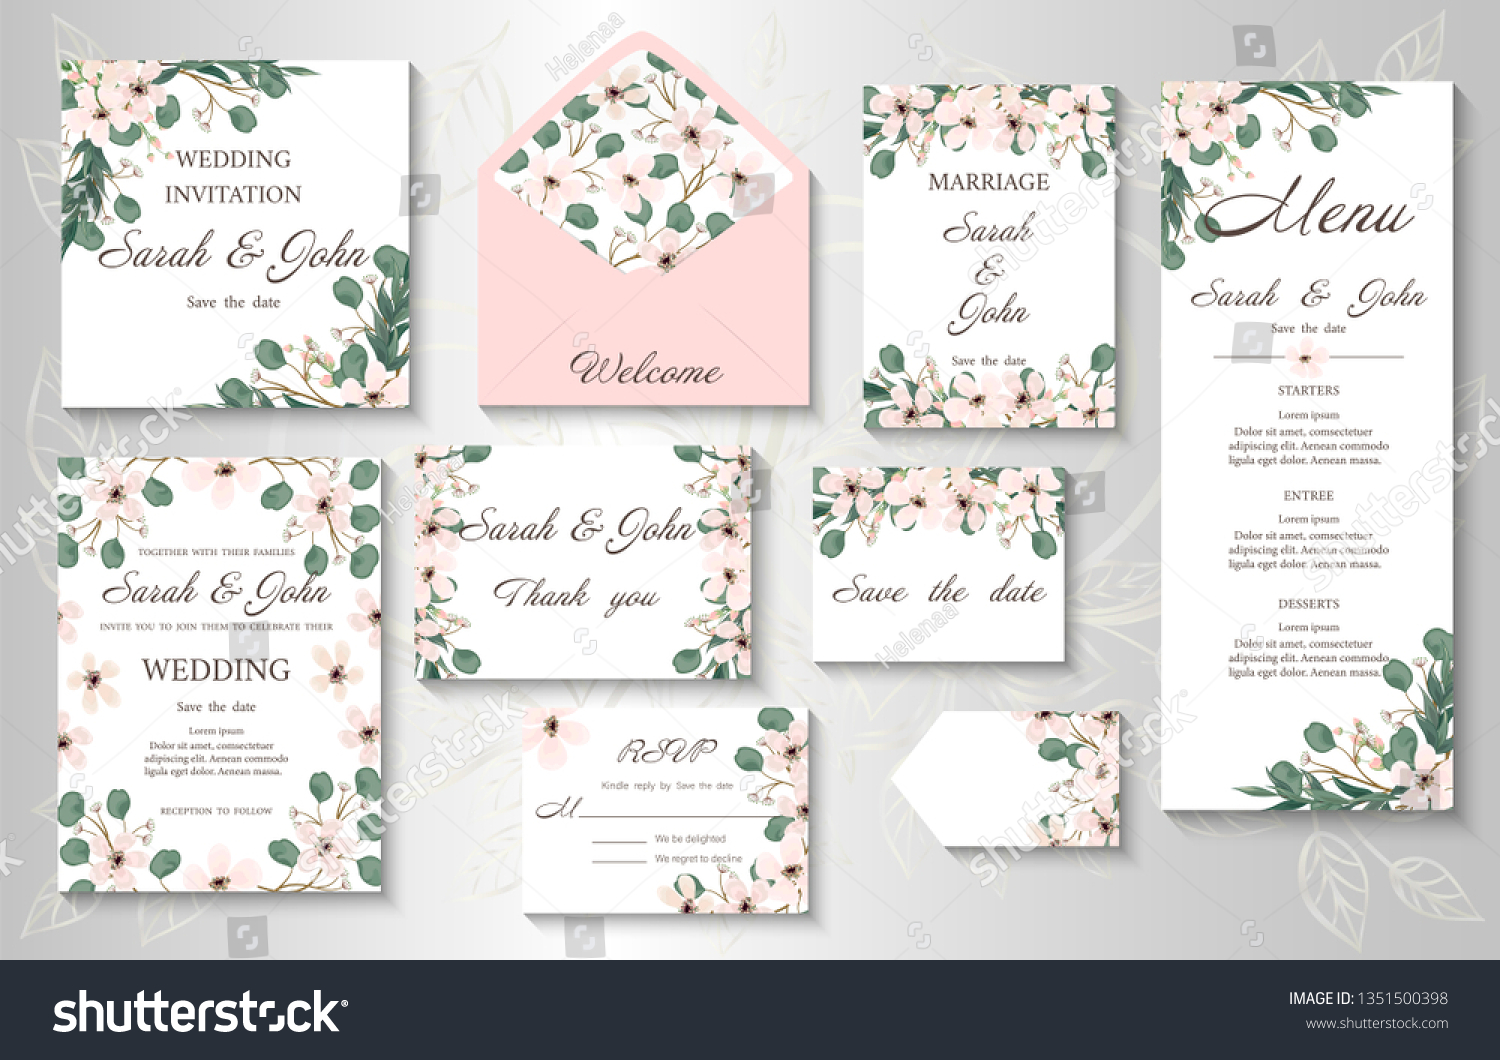 Wedding invitation, menu, information, label, card design with  gently pink watercolor flowers. Template set. Vector illustration.  #1351500398